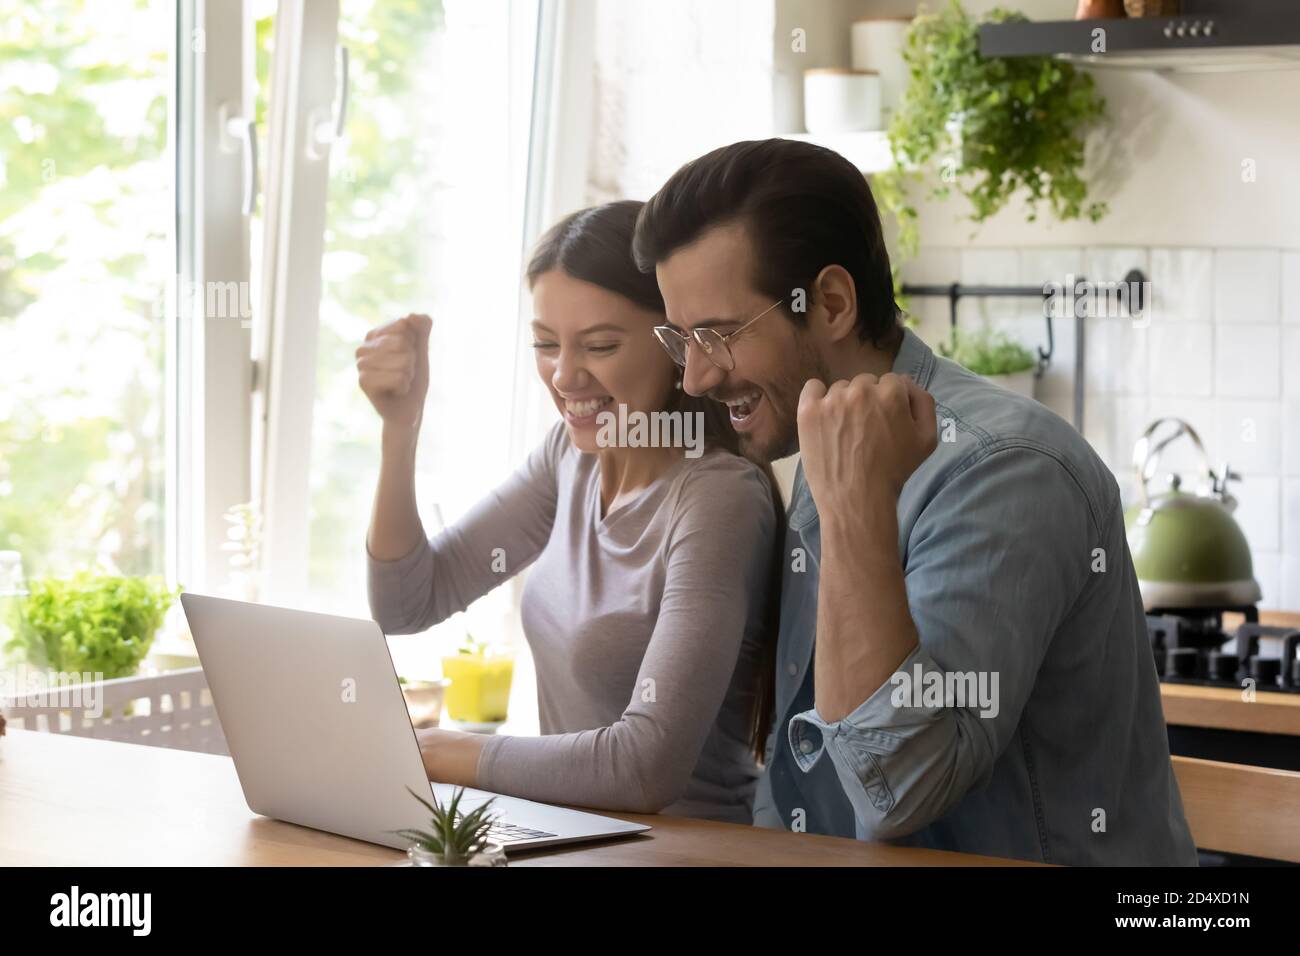 Overjoyed young married couple making yes gesture, looking at computer. Stock Photo